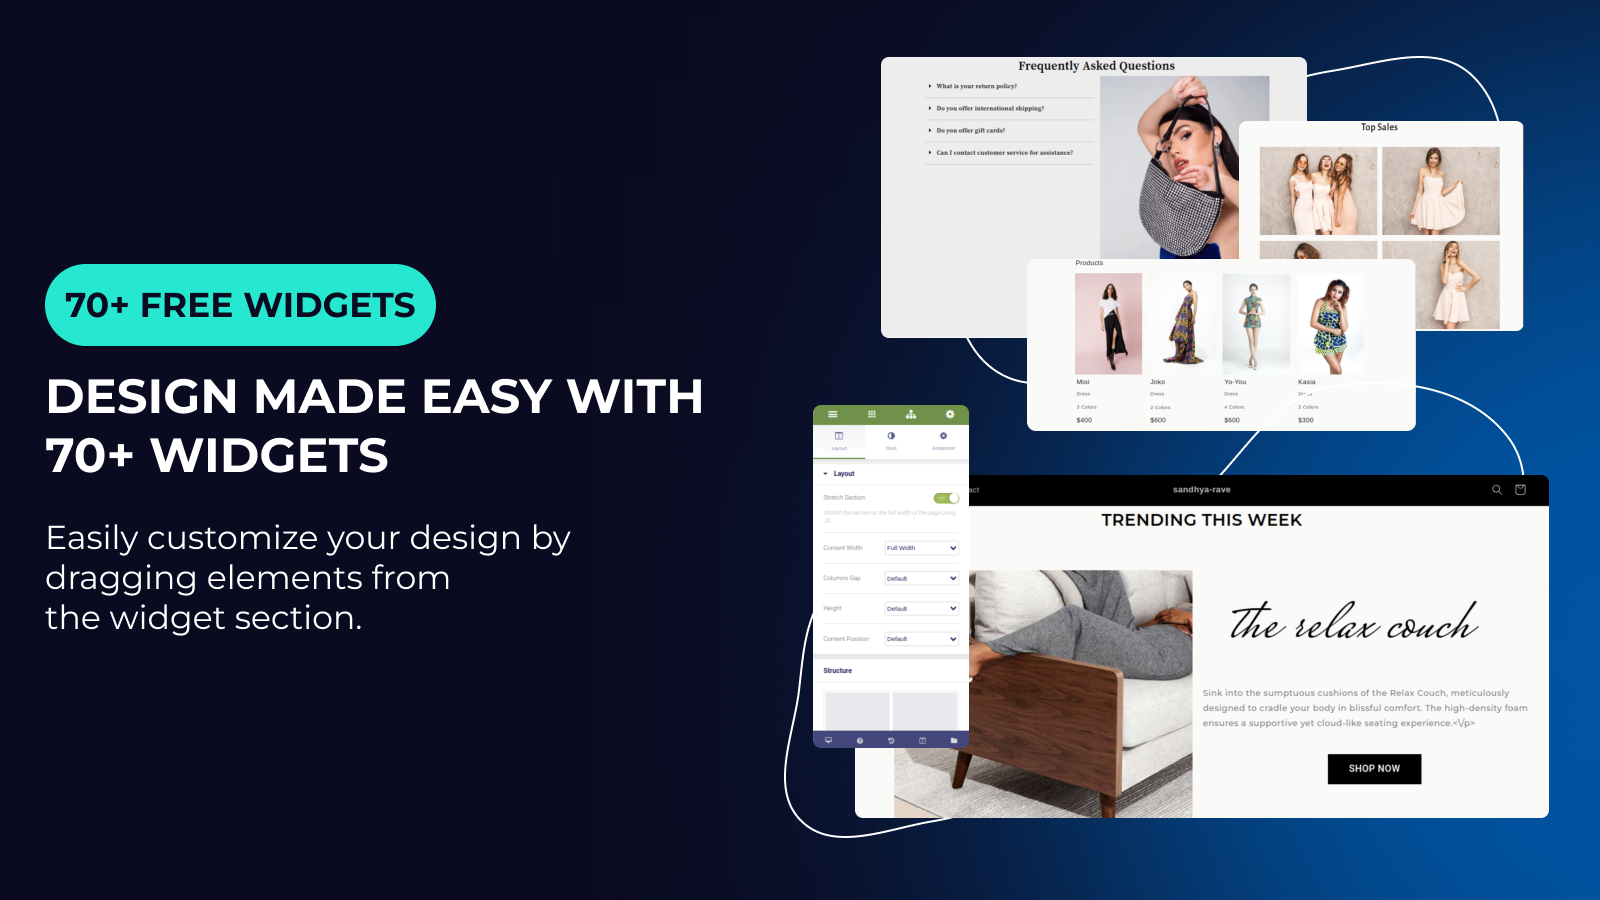 Shopify store Social Icons via Page Builder on Landing Page